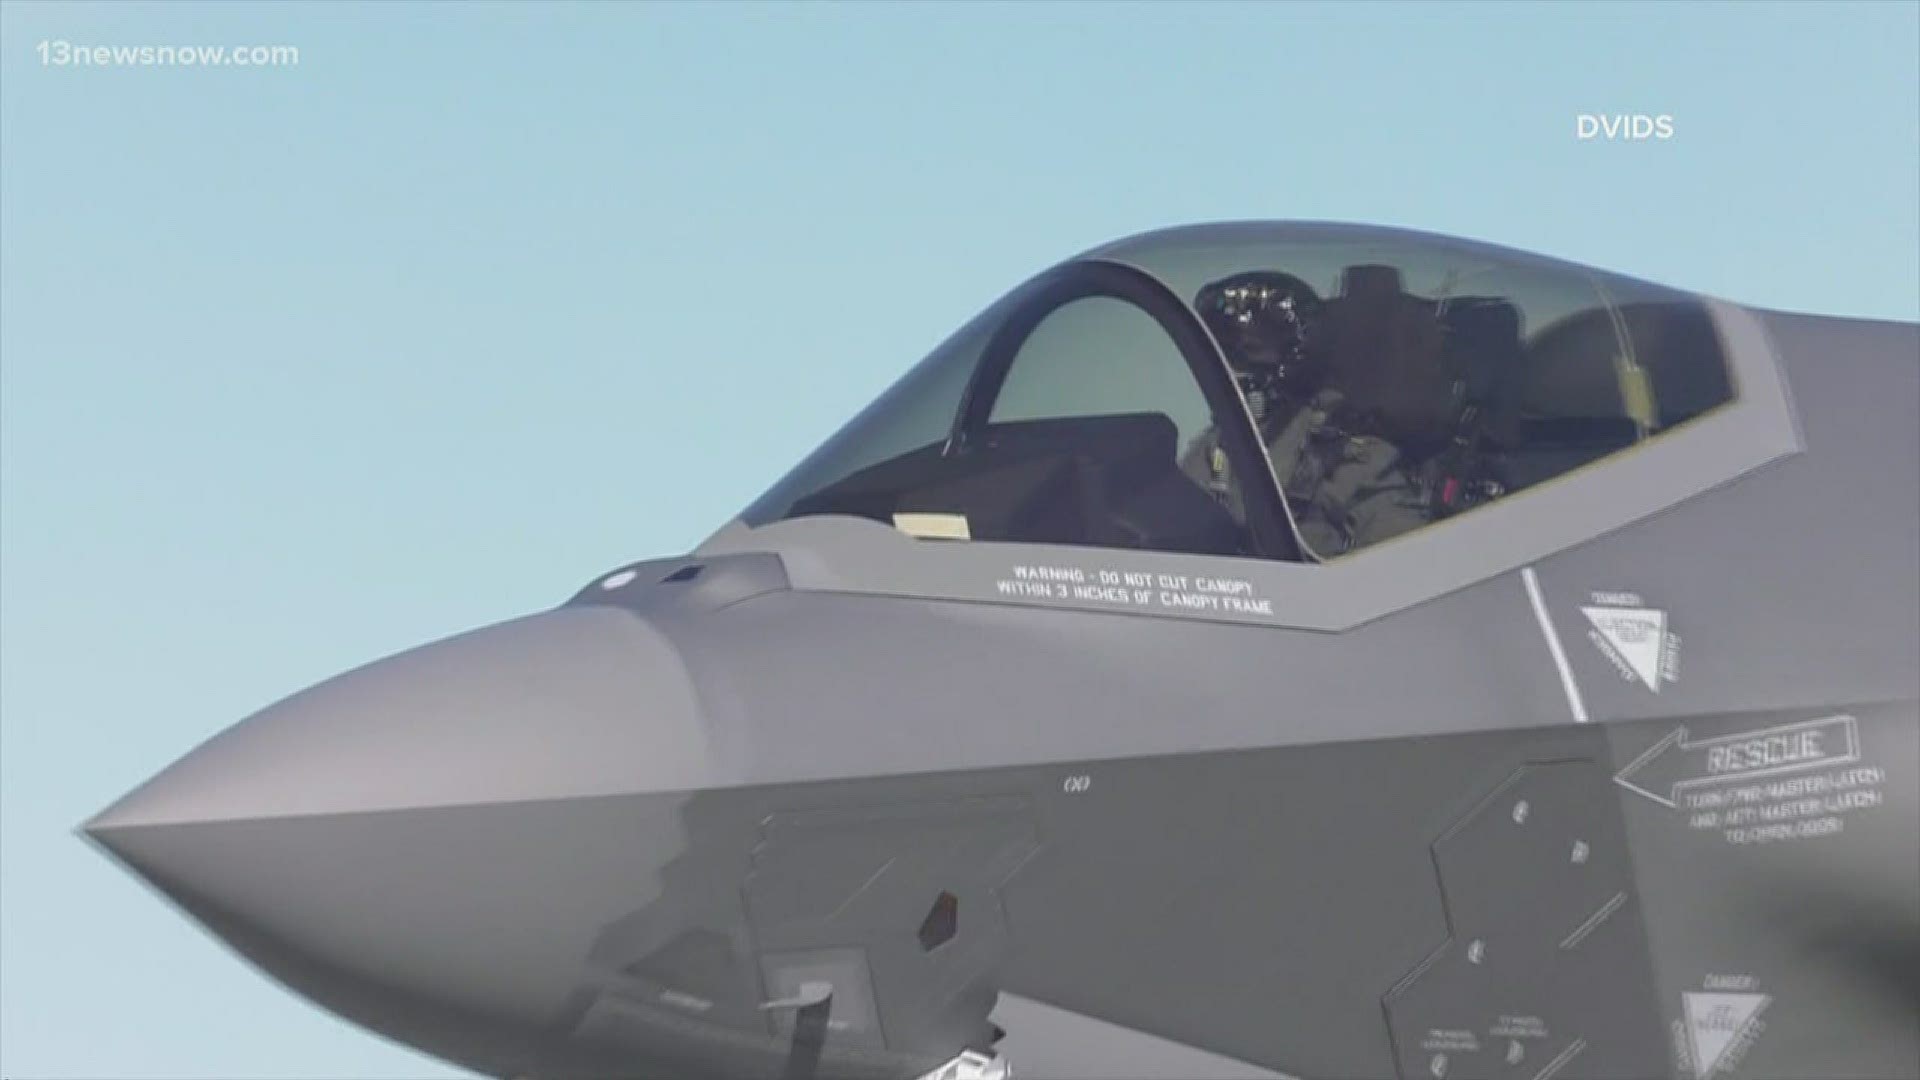 The F-35 Joint Strike Fighter program is years behind schedule and billions of dollars over budget. A report said the program is not meeting reliability standards.